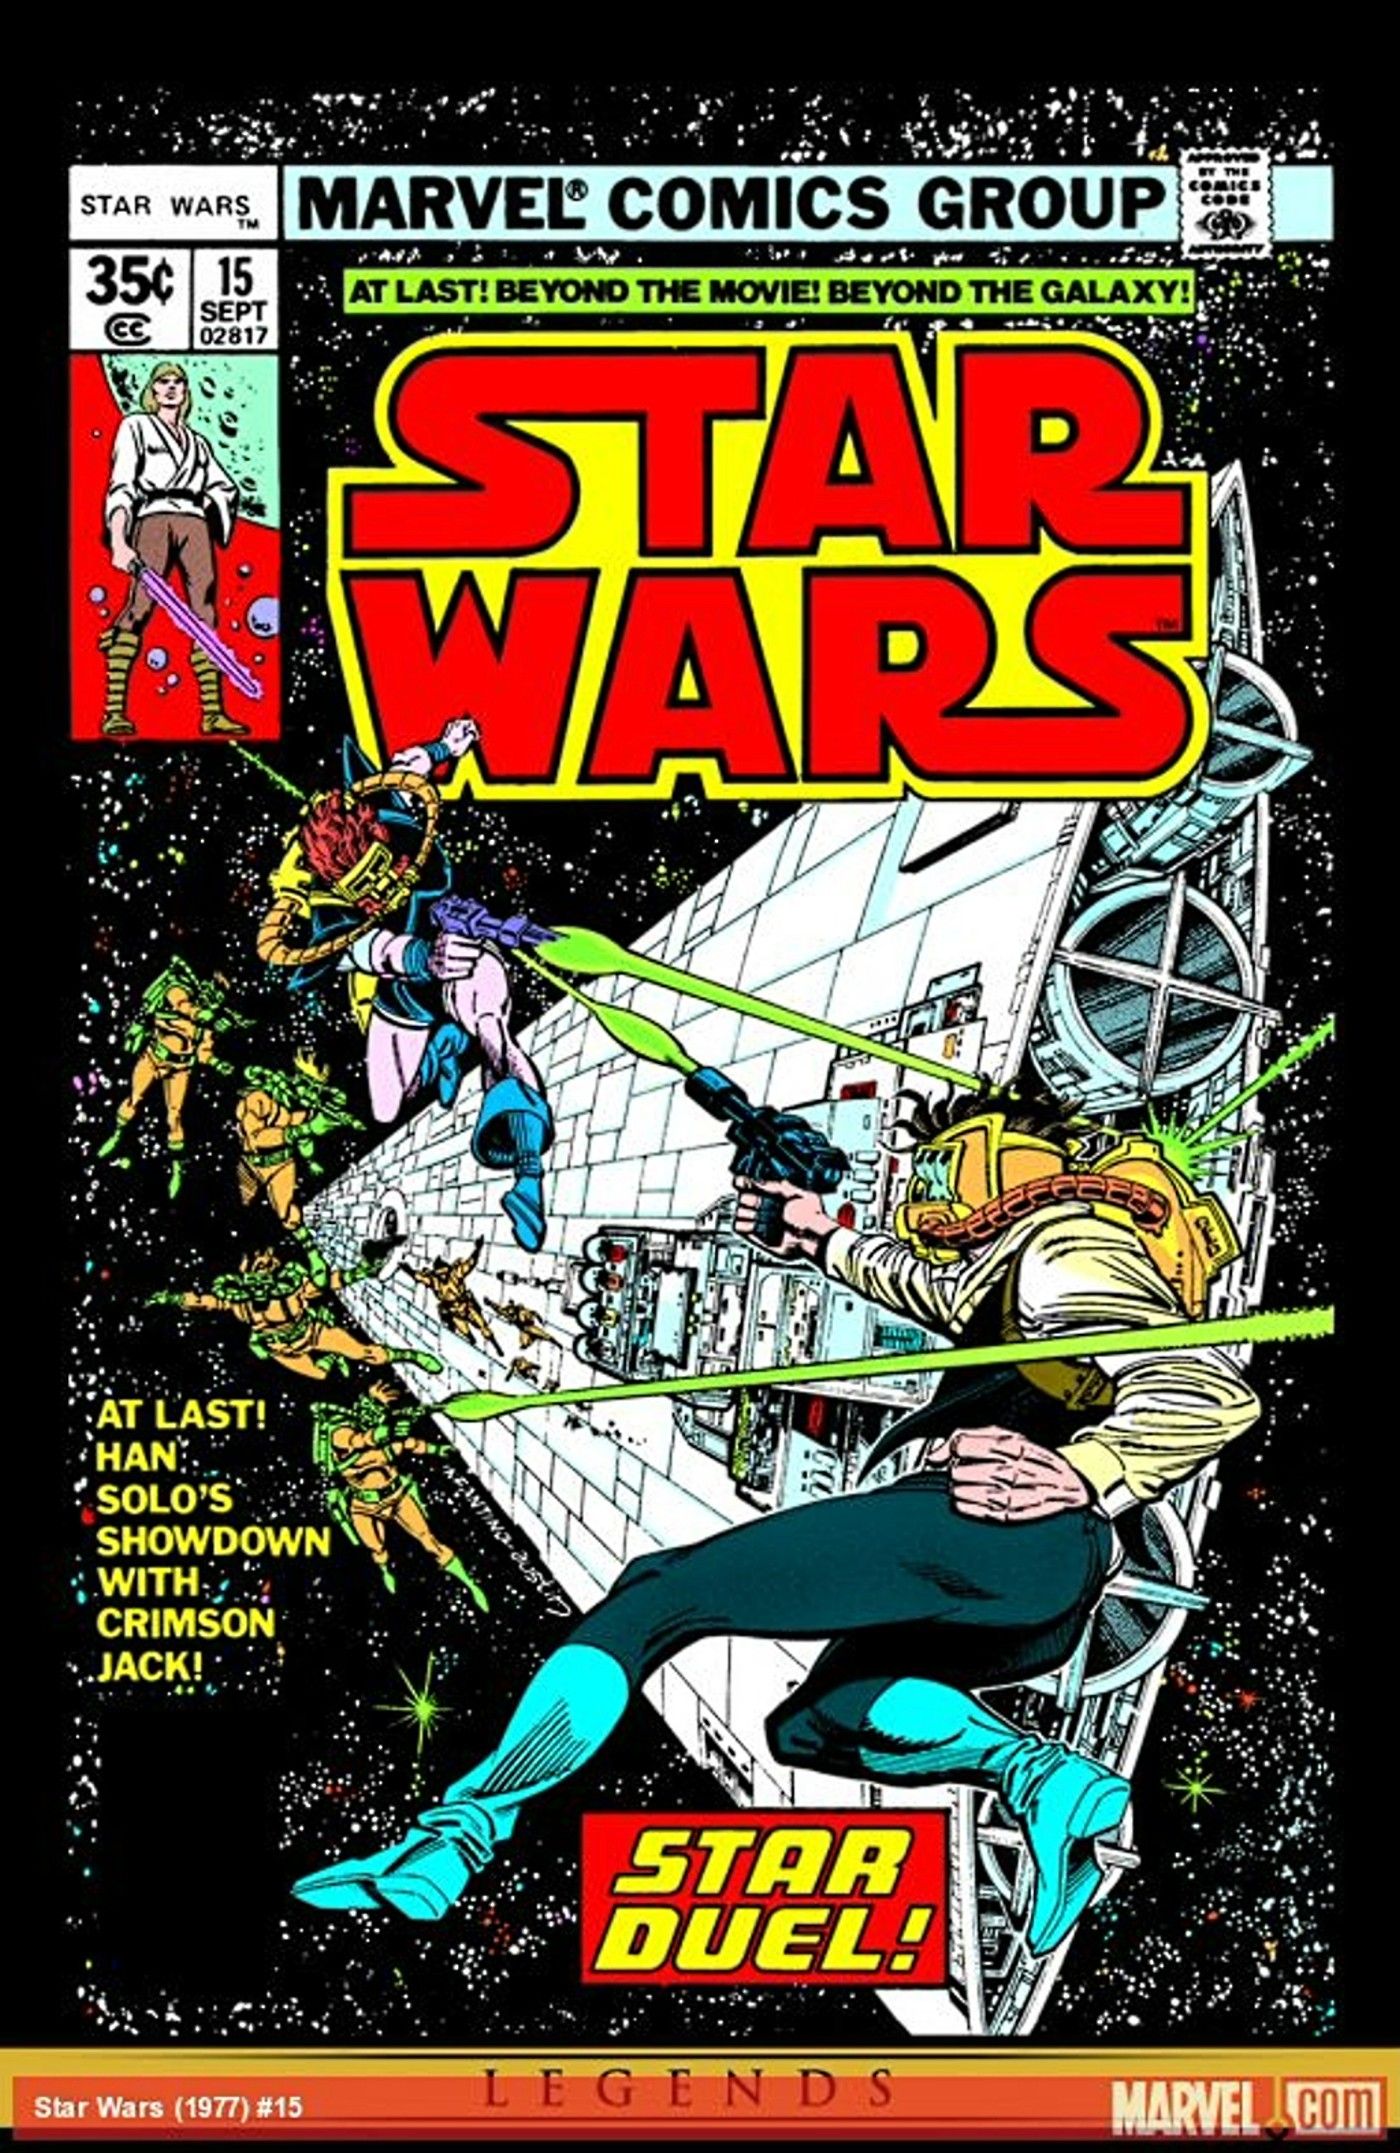 When Will Star Wars Start To Copy Marvel’s Most Exciting New Story Trend?